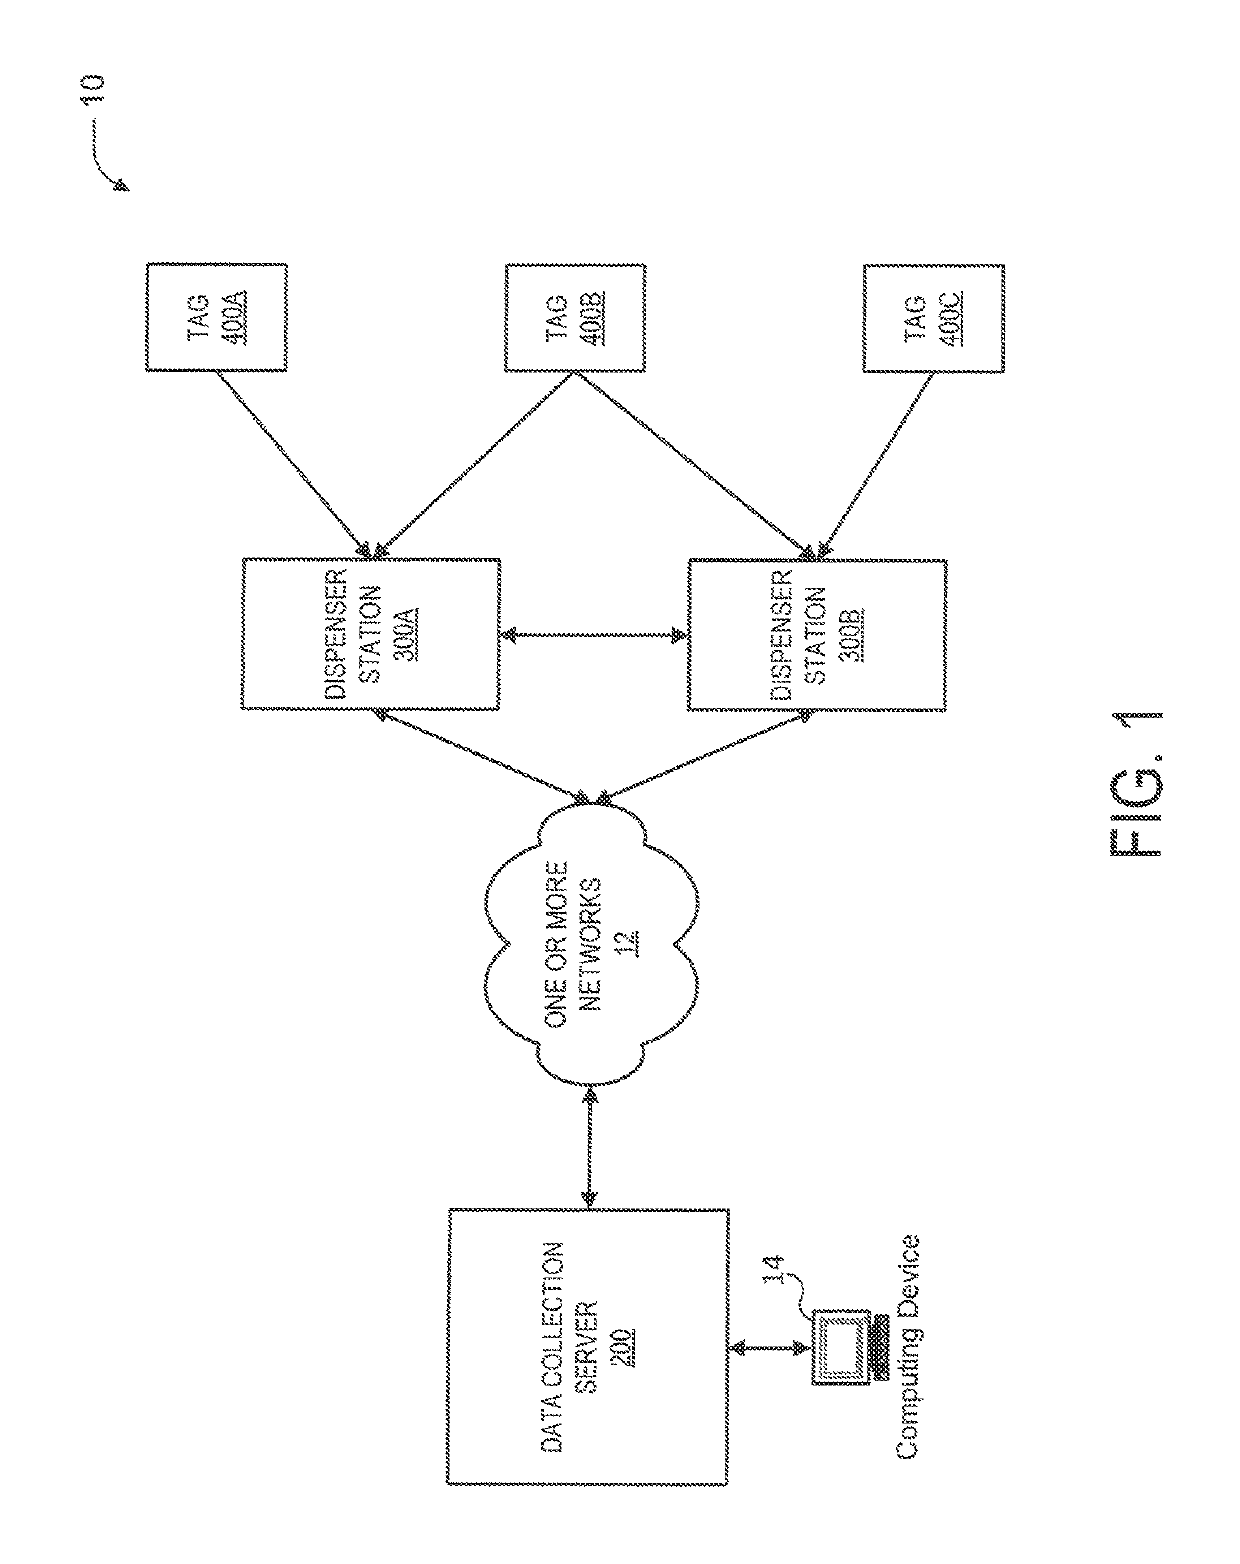 System and methods for wireless hand hygiene monitoring